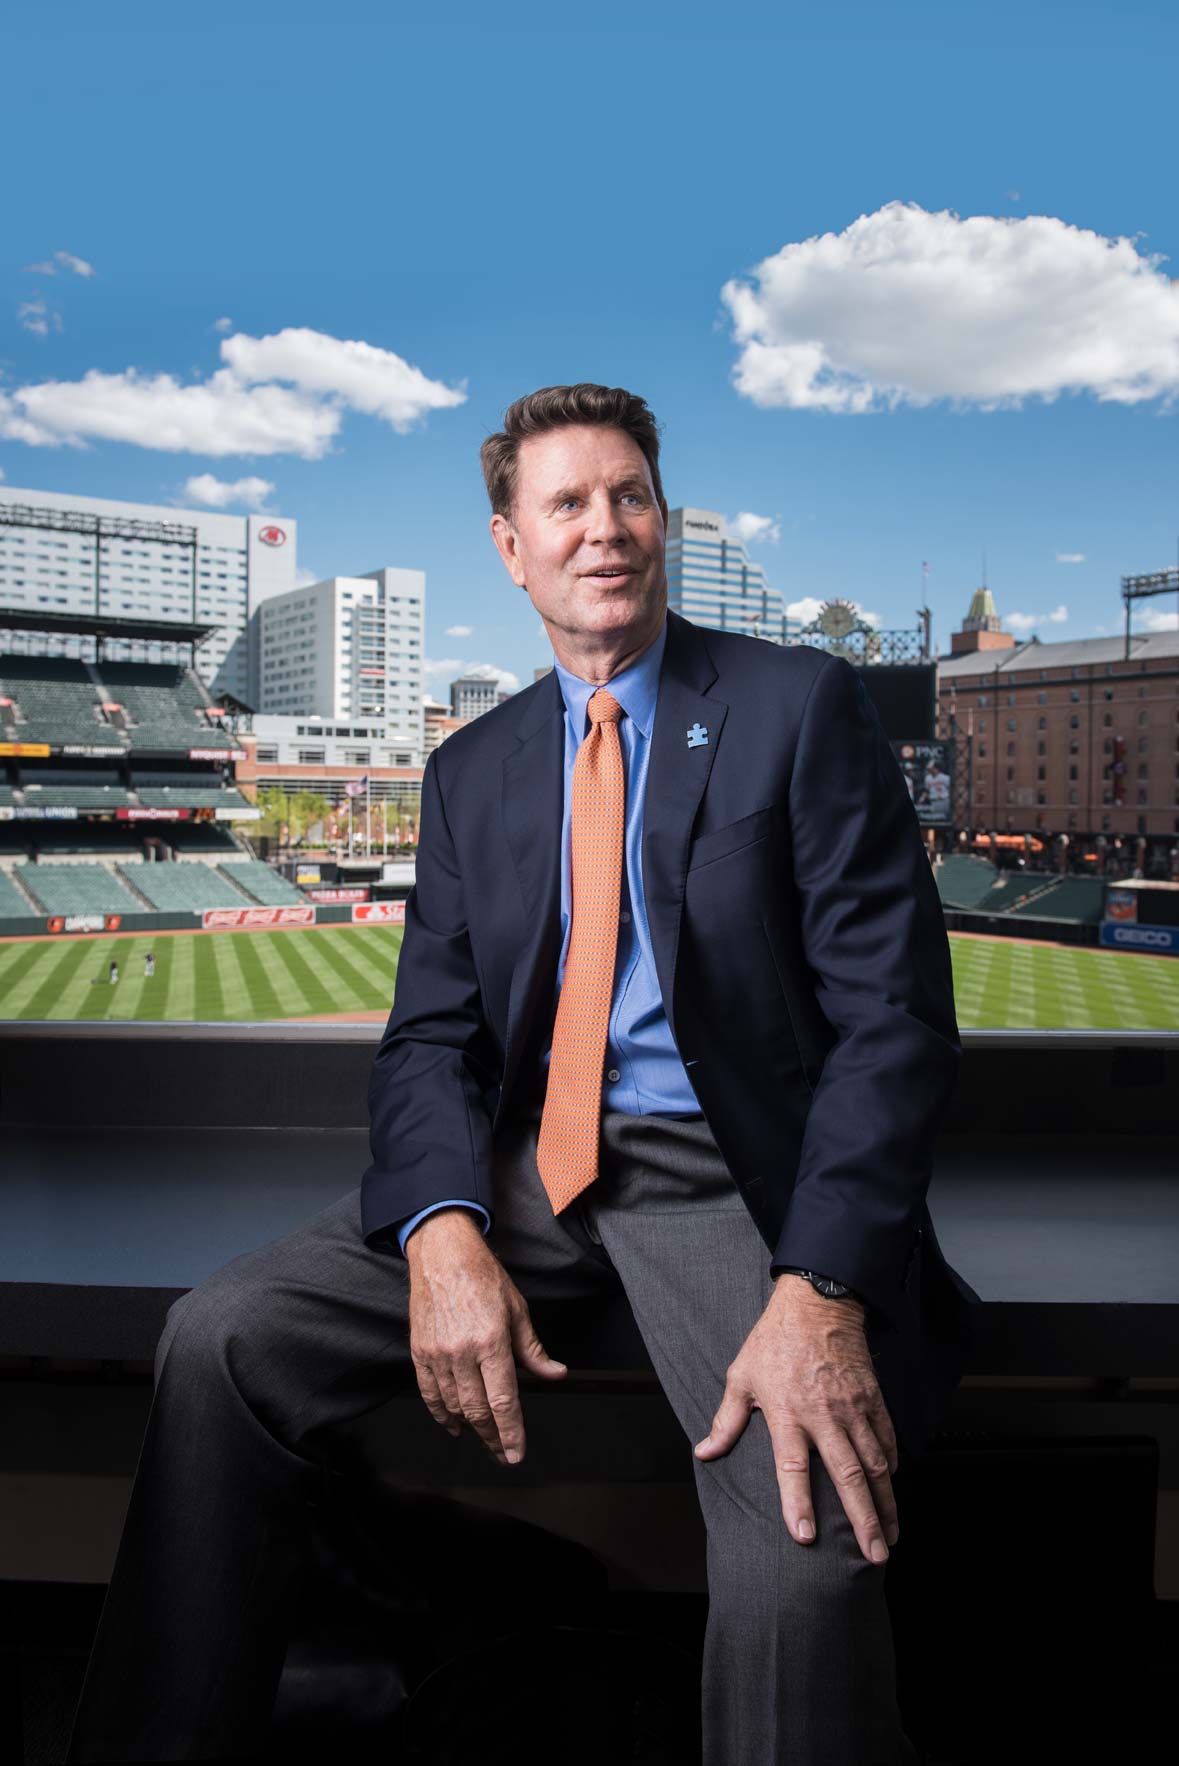 Orioles broadcaster Jim Palmer in the booth with Camden Yards in the background